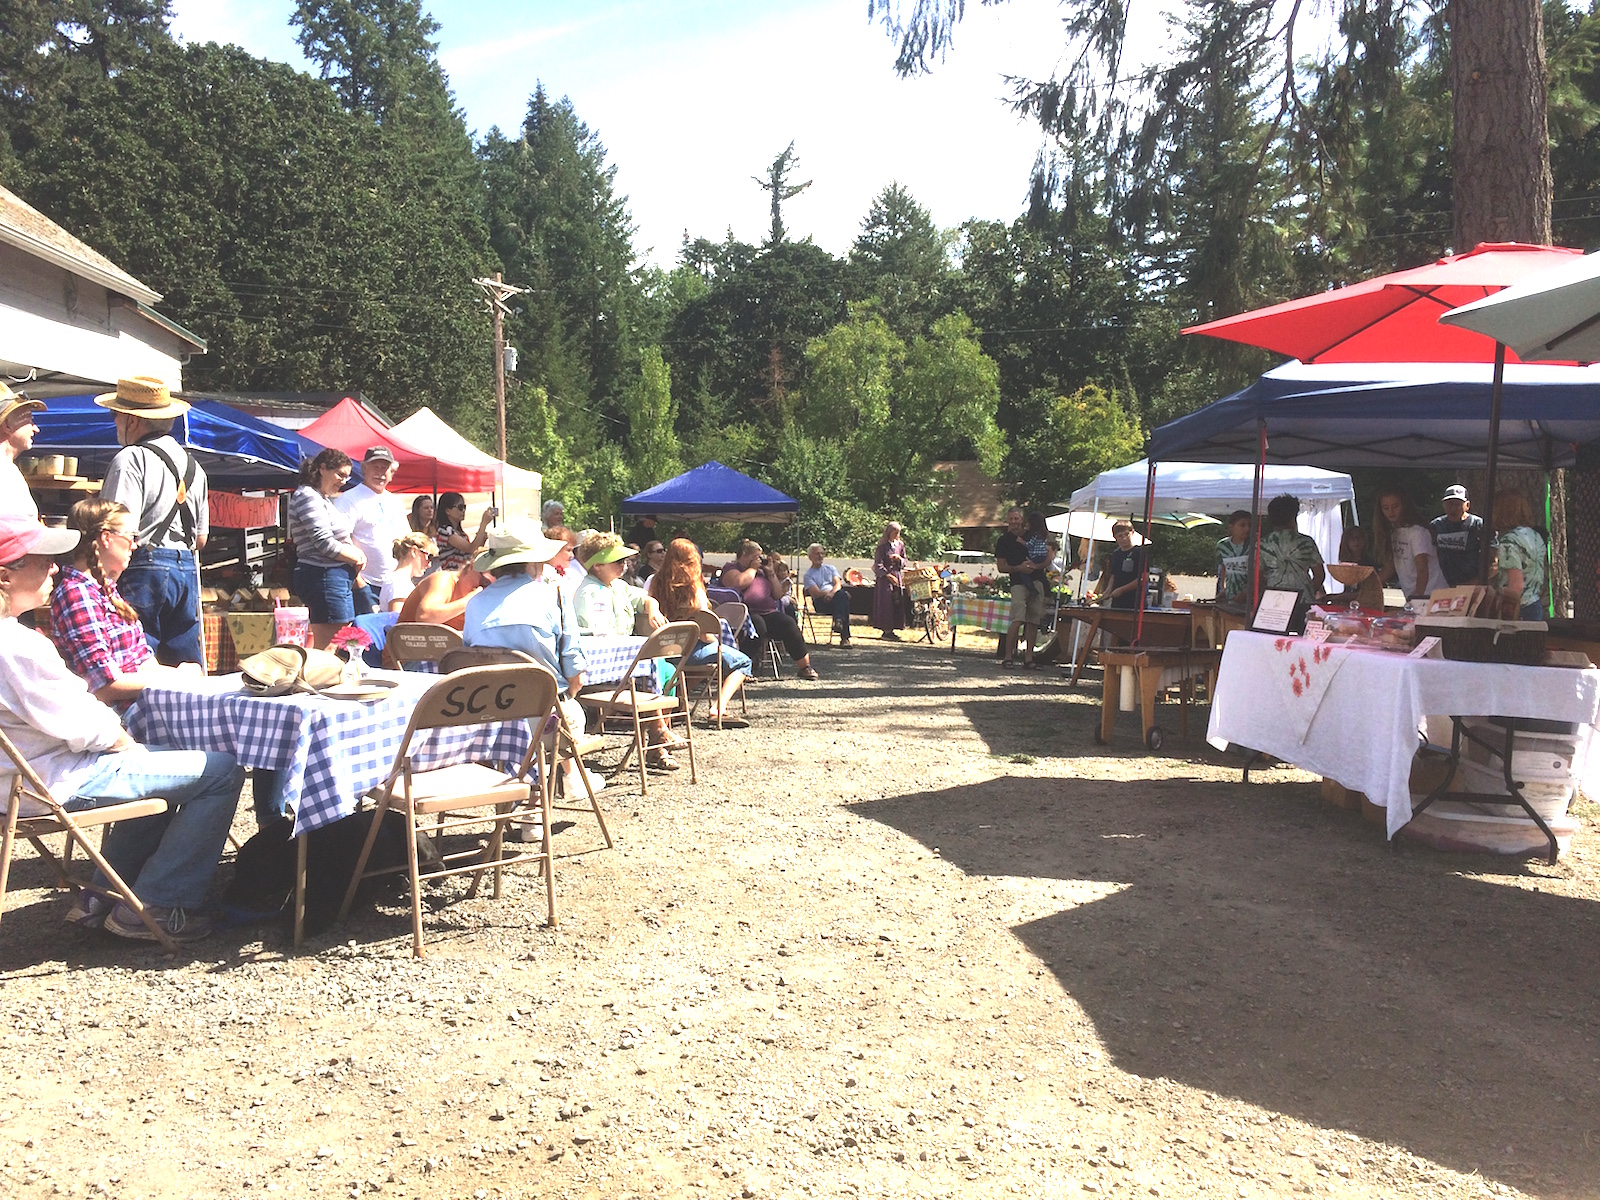 View of the Market last week when the Adams School Marimba Band performed at the Spencer Creek Growers Market